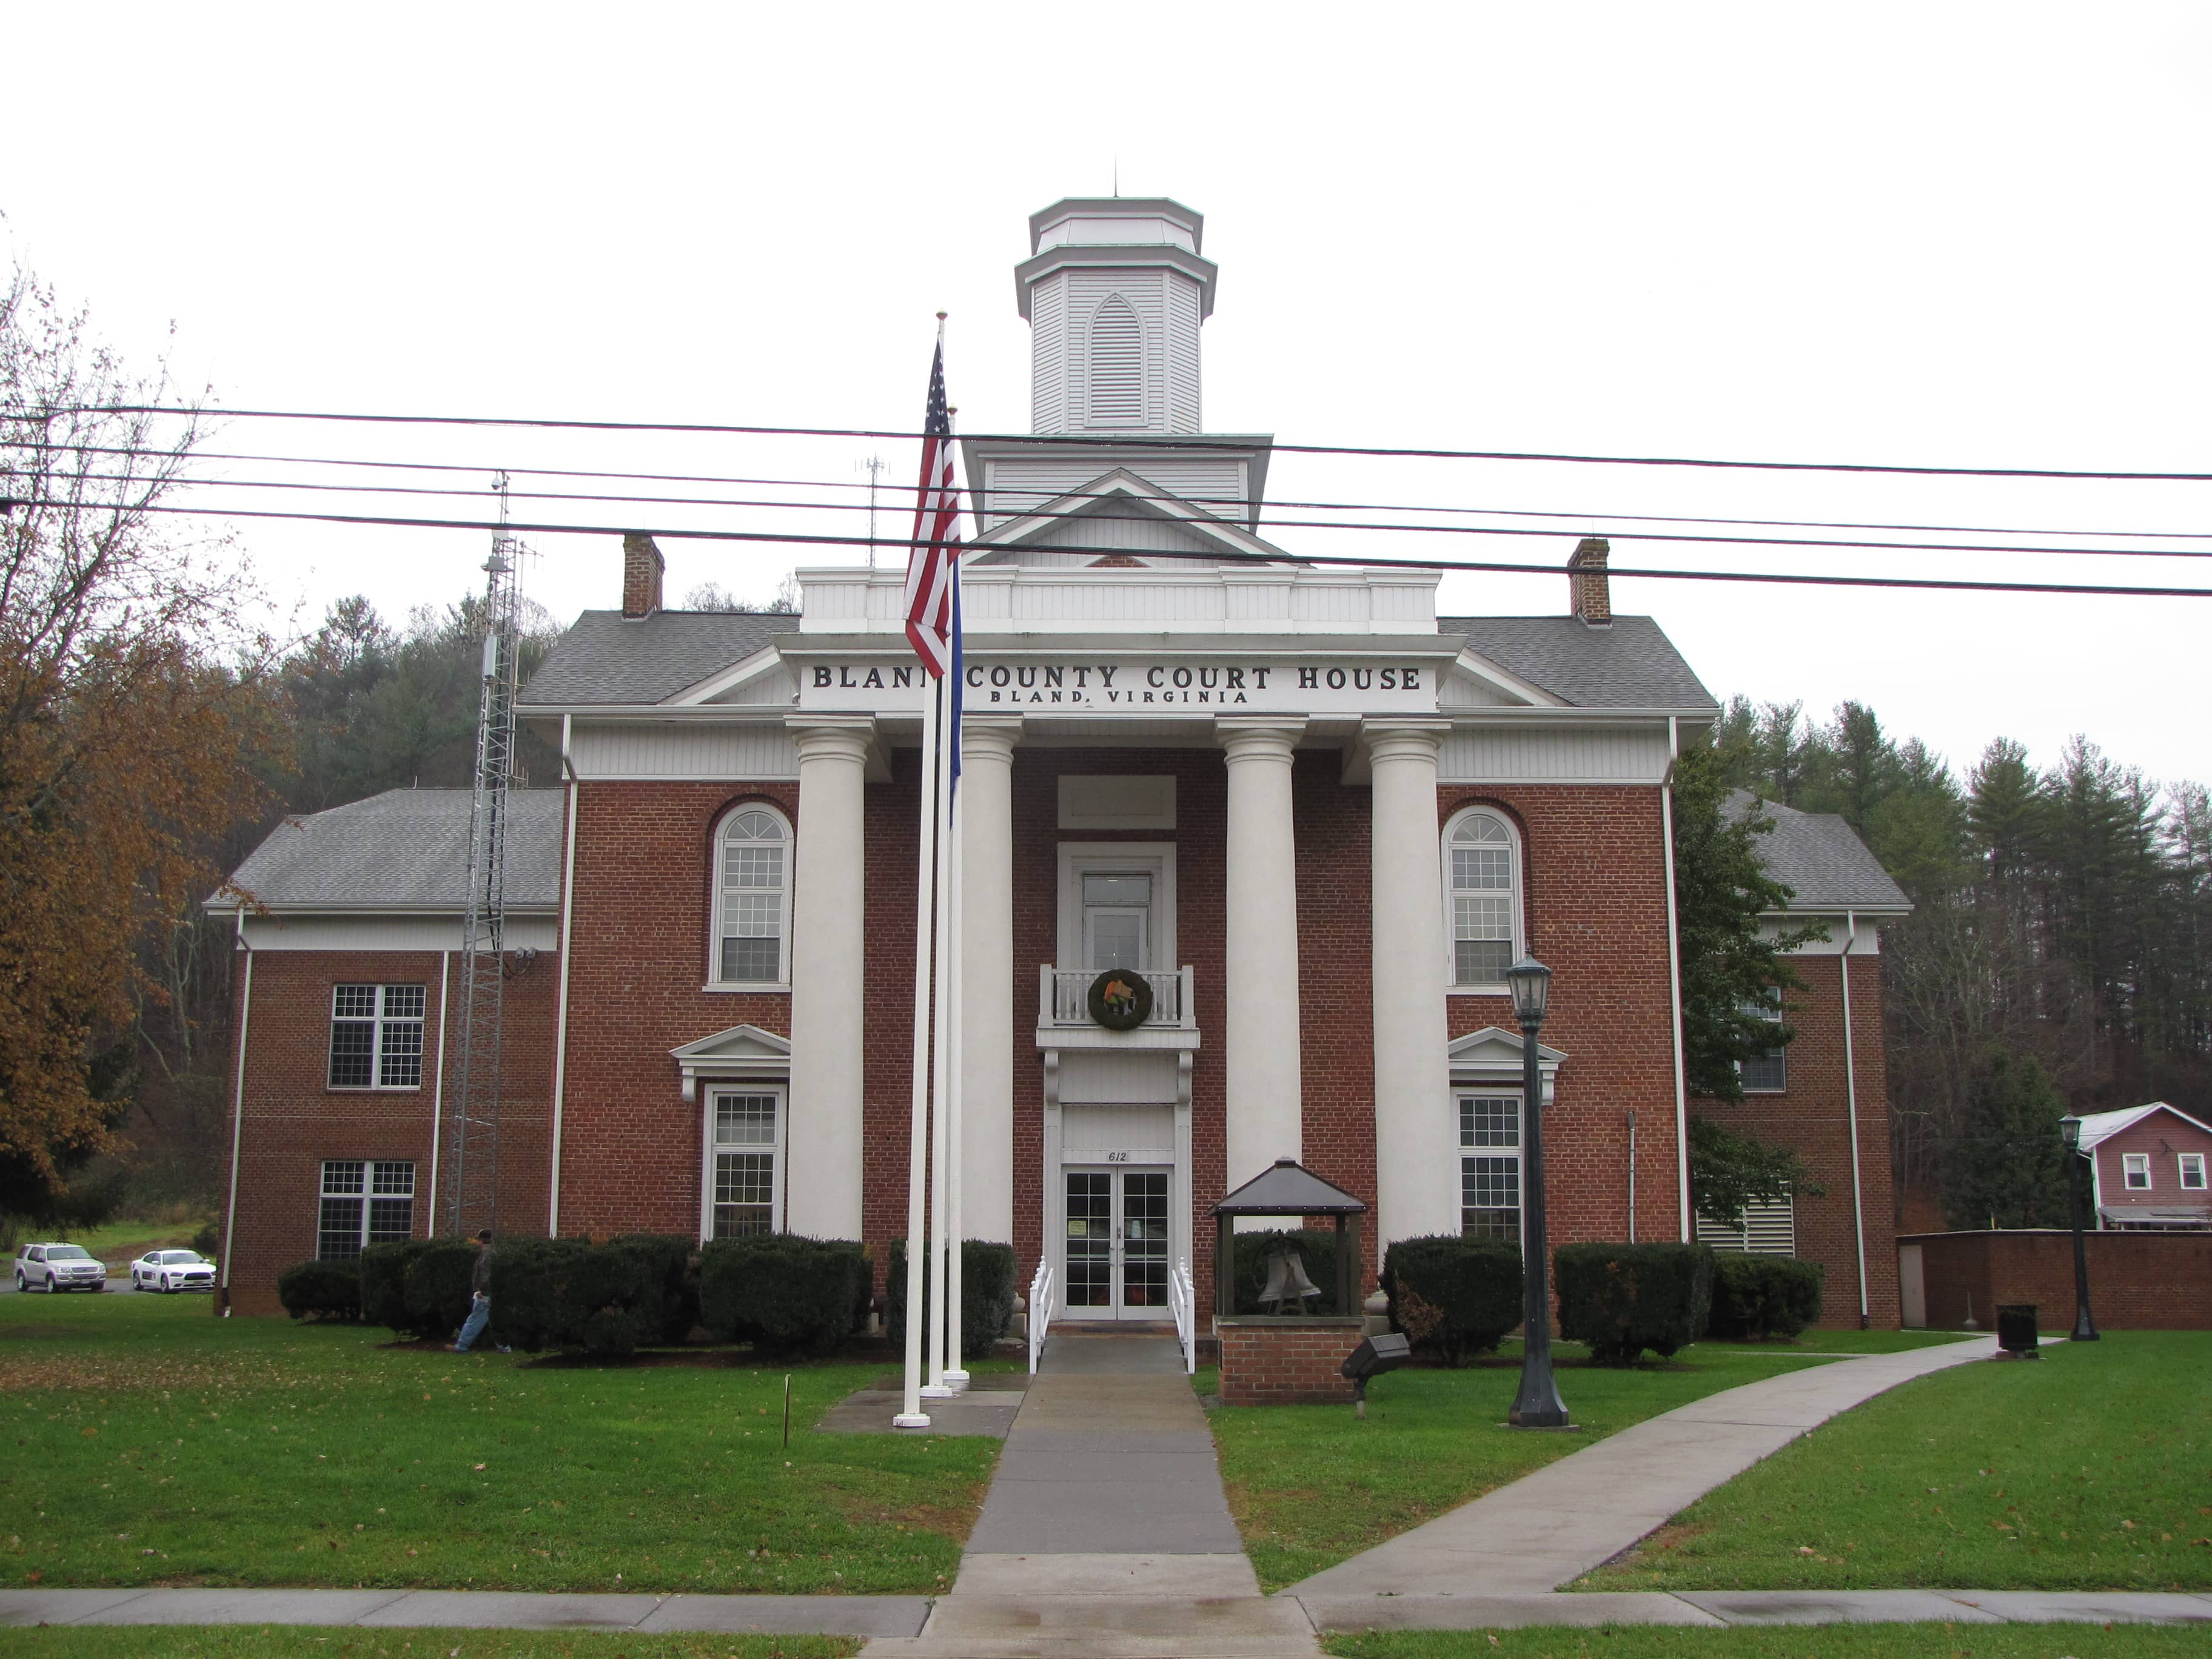 Image of Bland County Clerk's Office